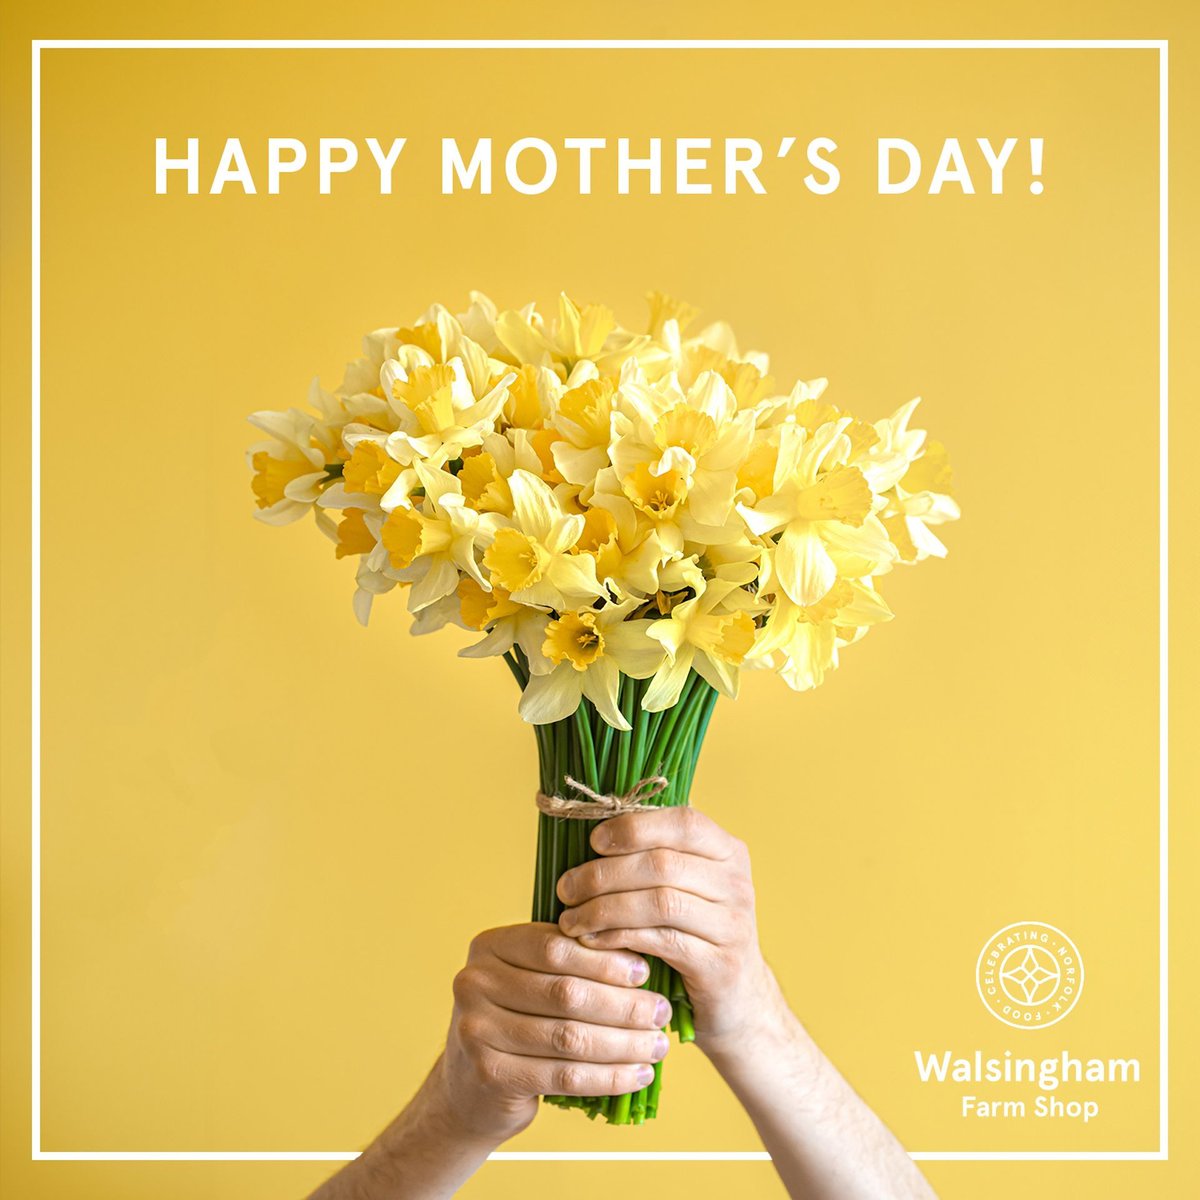 Happy Mother's Day from all of us at Walsingham Farm Shop!